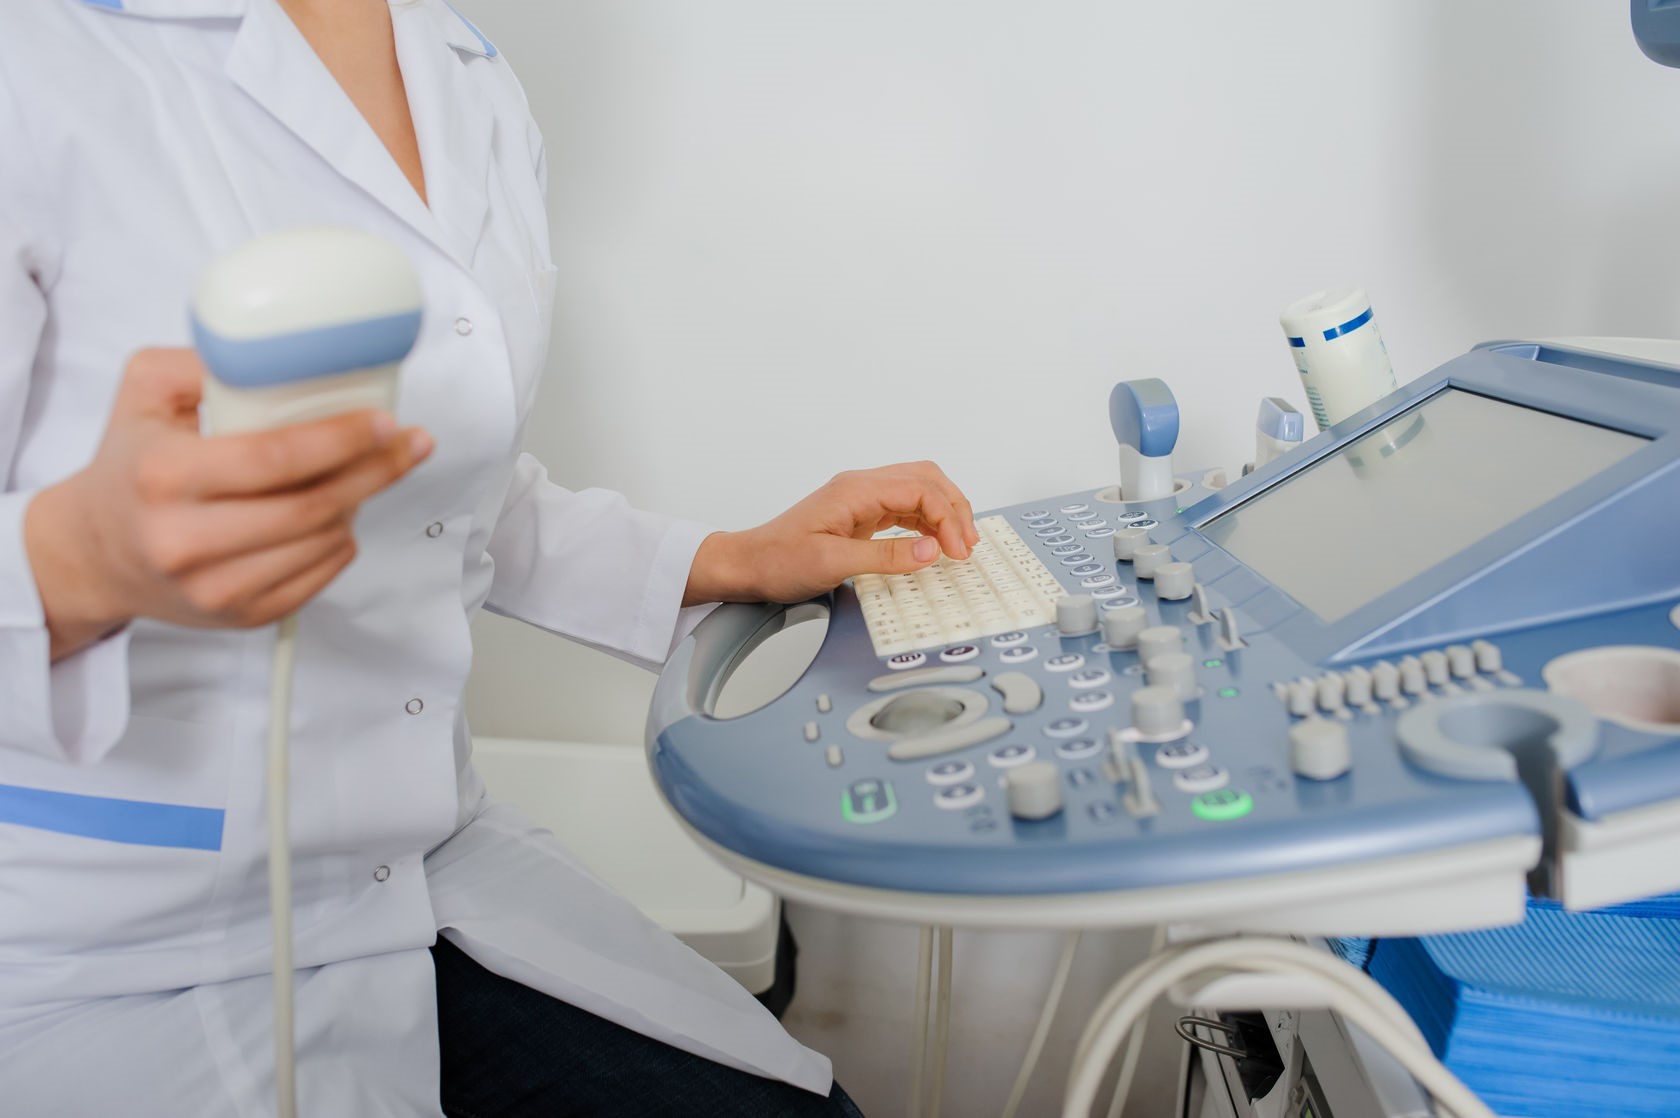 Ultrasound therapy for pain: Types, safety, and benefits